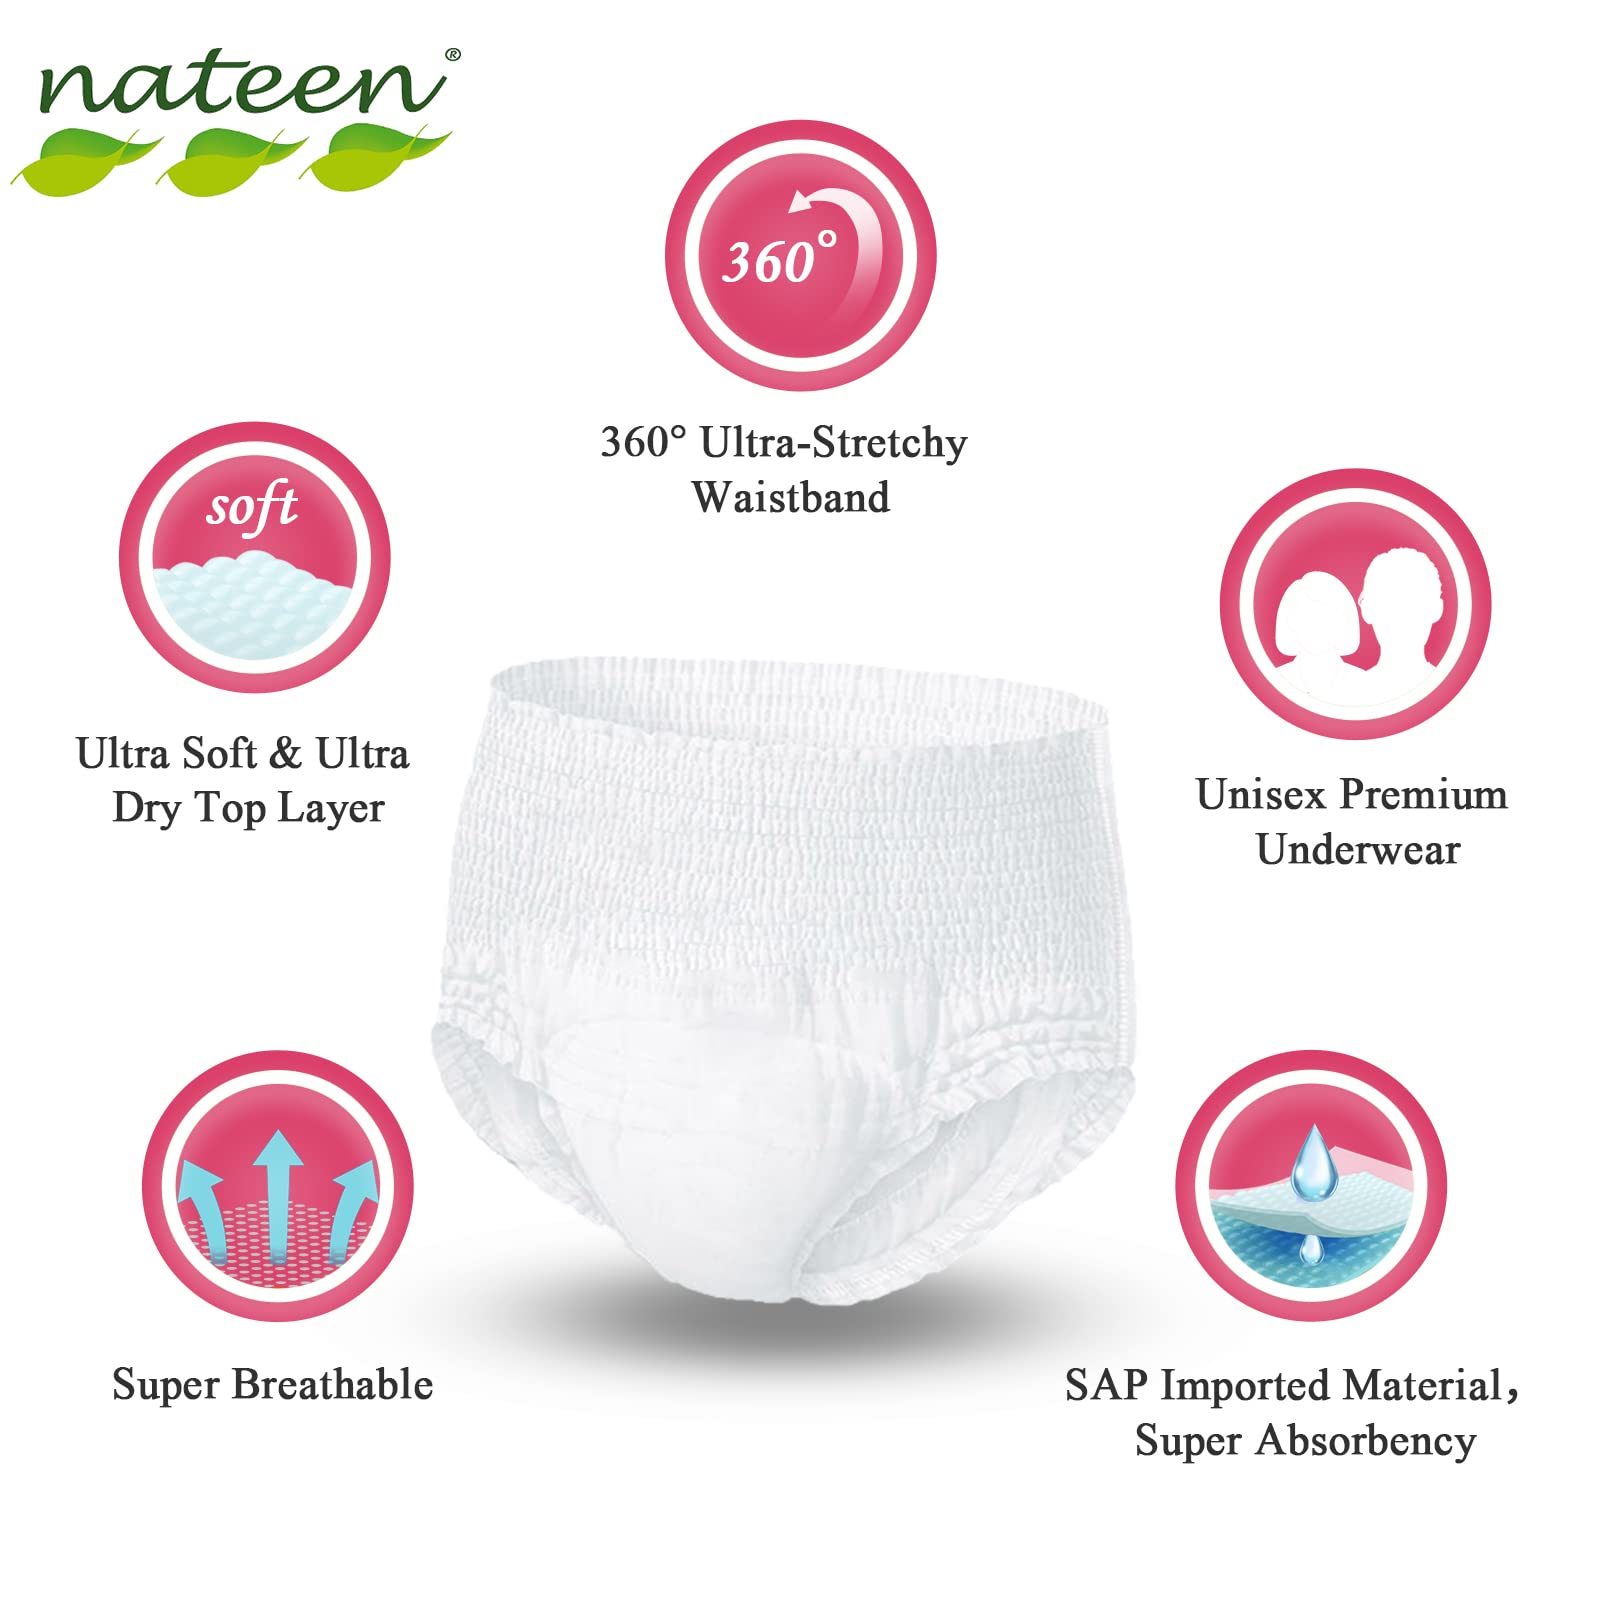 Nateen Flexi Plus Adult Diapers Pants,Incontinence Pull Up,Medium,Waist Size 90-130cm,20 Count,Superior Comfort,Excellent Combination of Protection.